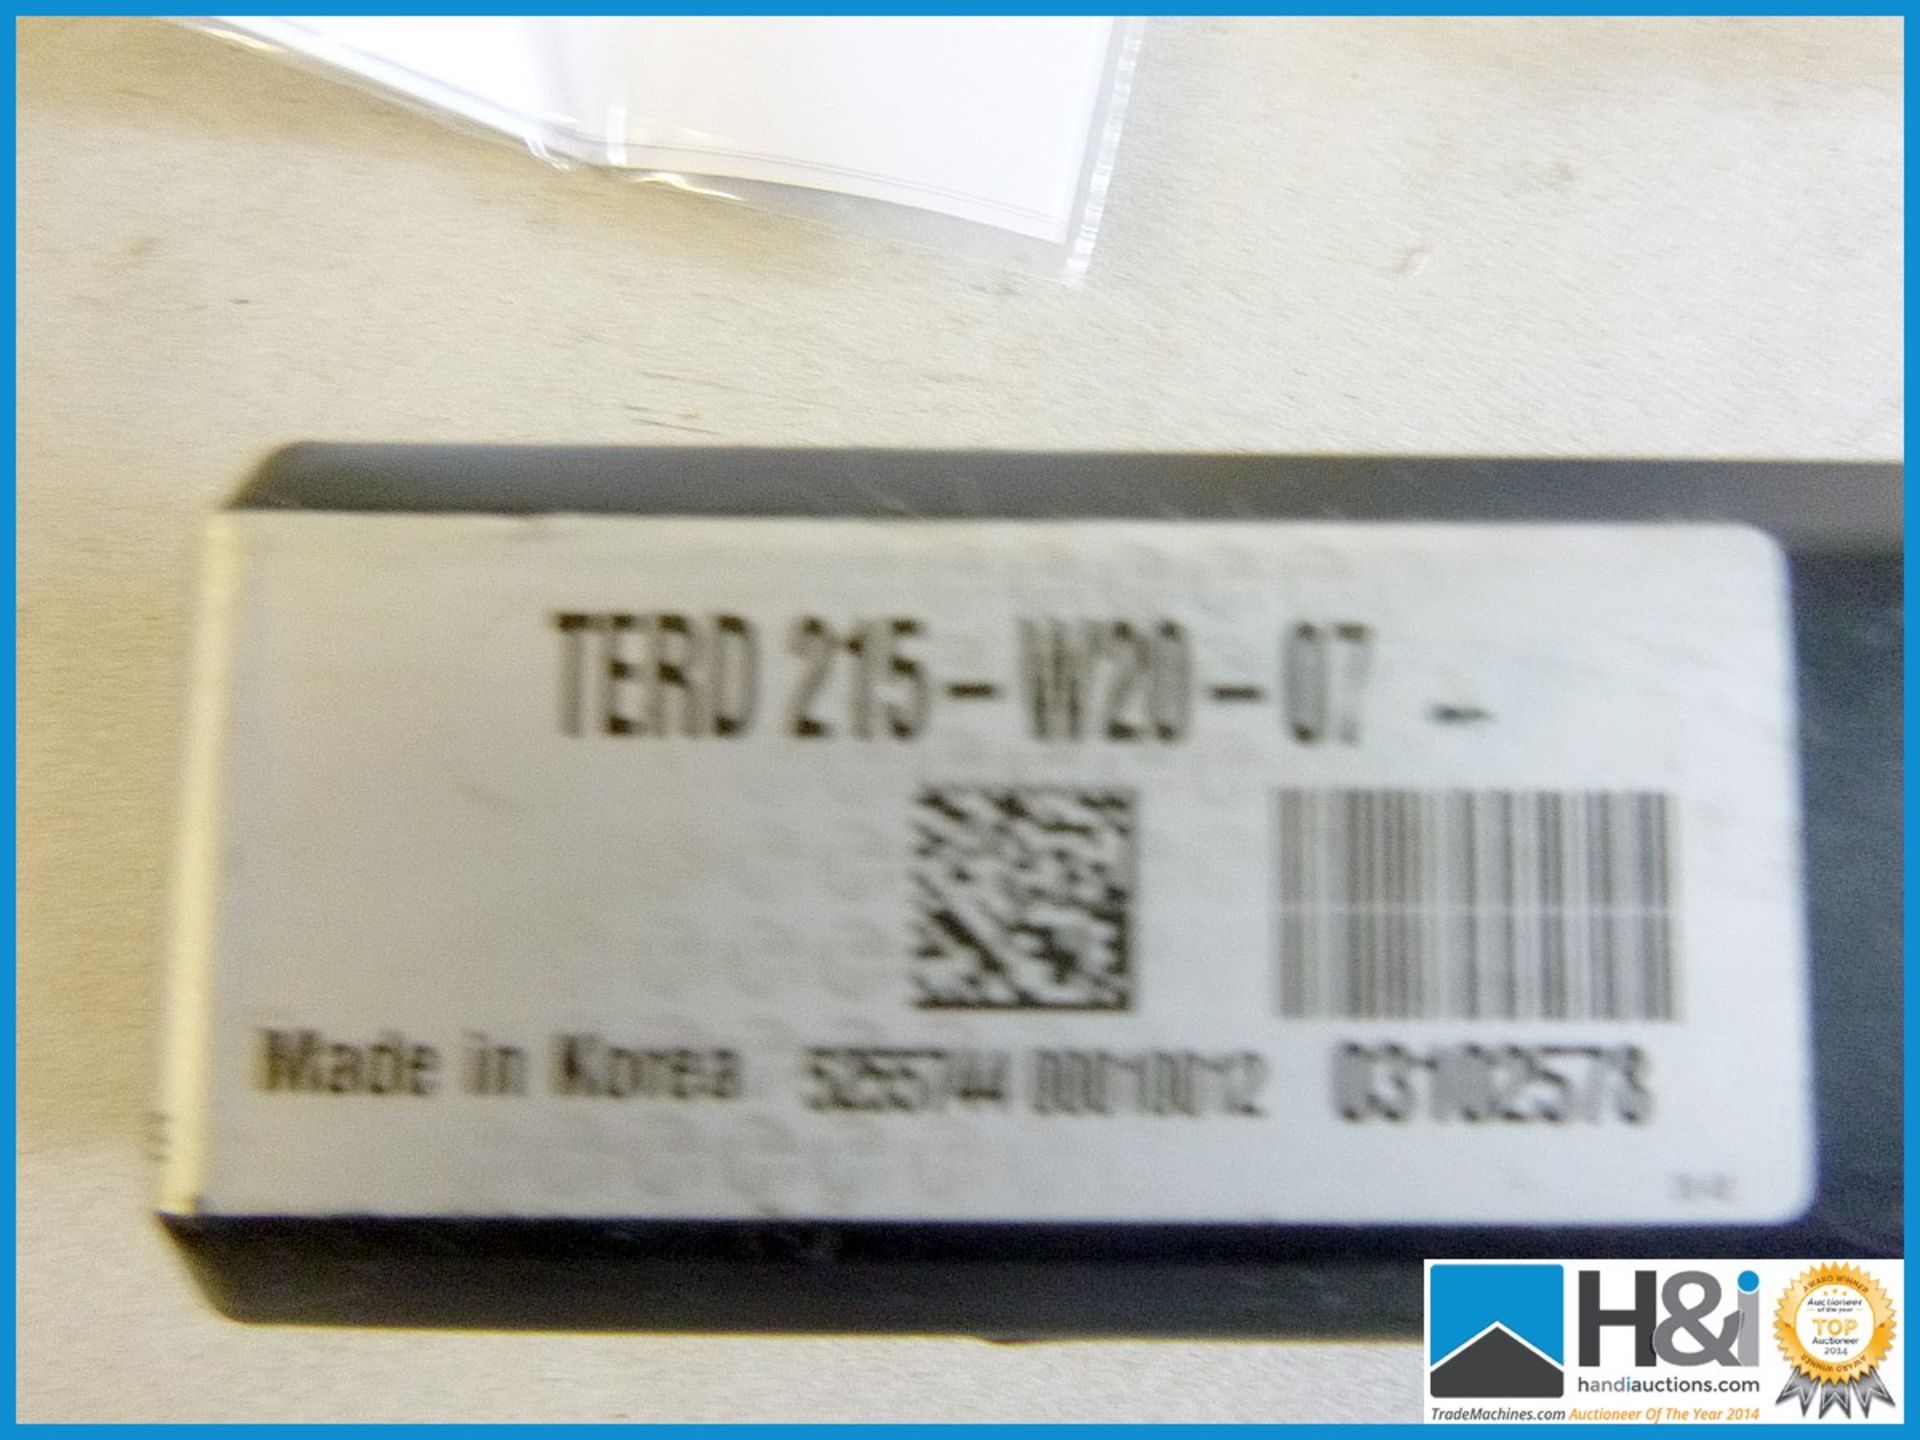 TERD 215-W20-07 15.0MM INDEXABLE E/MILL. X 2 pcs. Appraisal: New, unused in original packaging. - Image 2 of 2